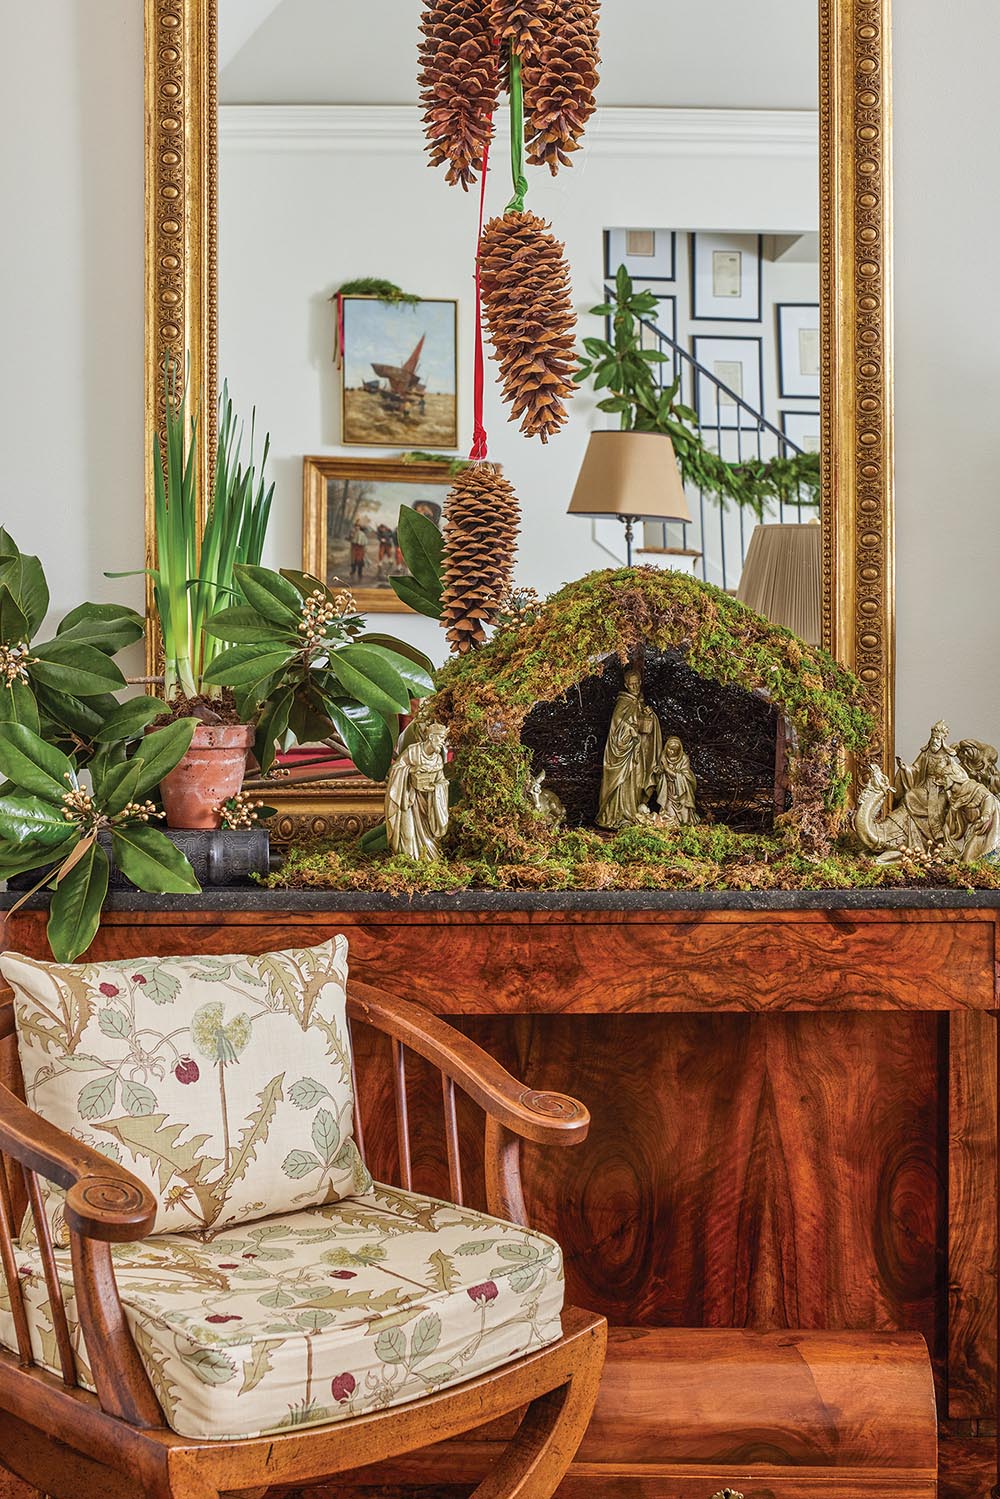 sideboard decorated with pine cones, magnolia leaves and paperwhites